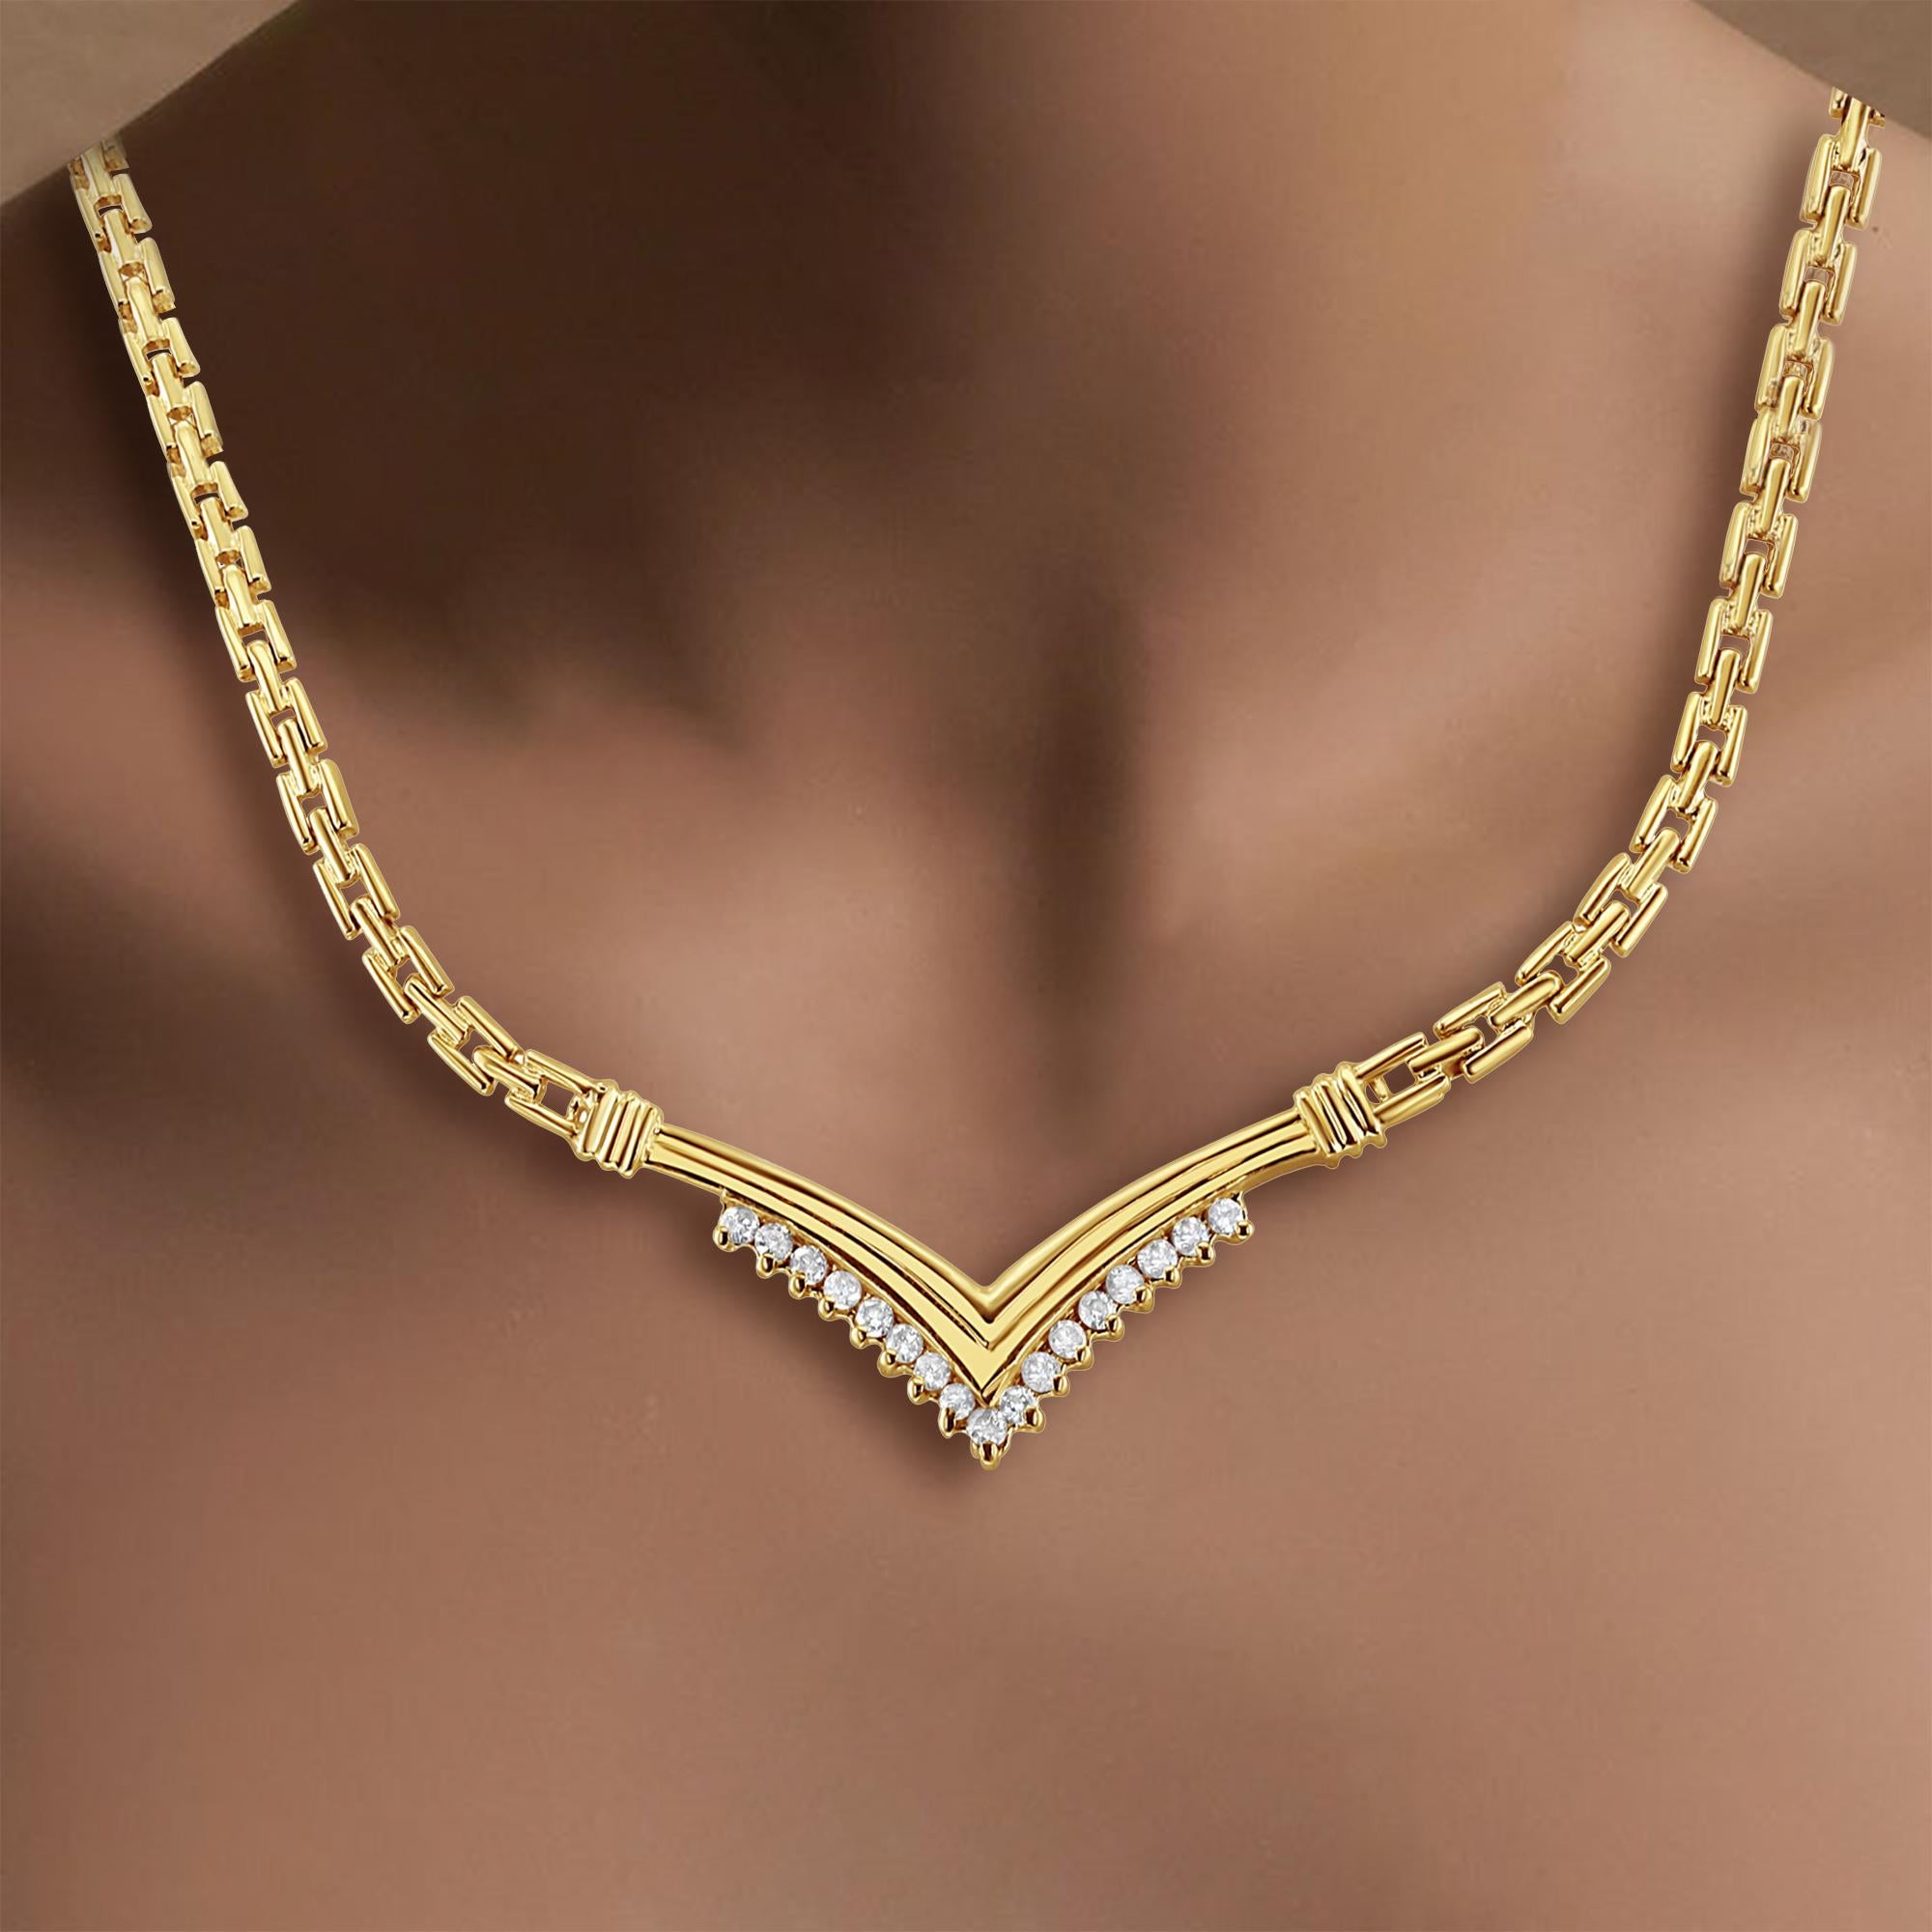 ♥ Product Summary ♥

Main Stone: Diamond
Approx. Carat Weight: .33cttw
Stone Cut: Round 
Material: 14k Yellow Gold
Dimensions: 48mm x 22mm
Chain: Link
Width of Chain: 3.15MM
Weight: 19 grams
Length: 17 inches